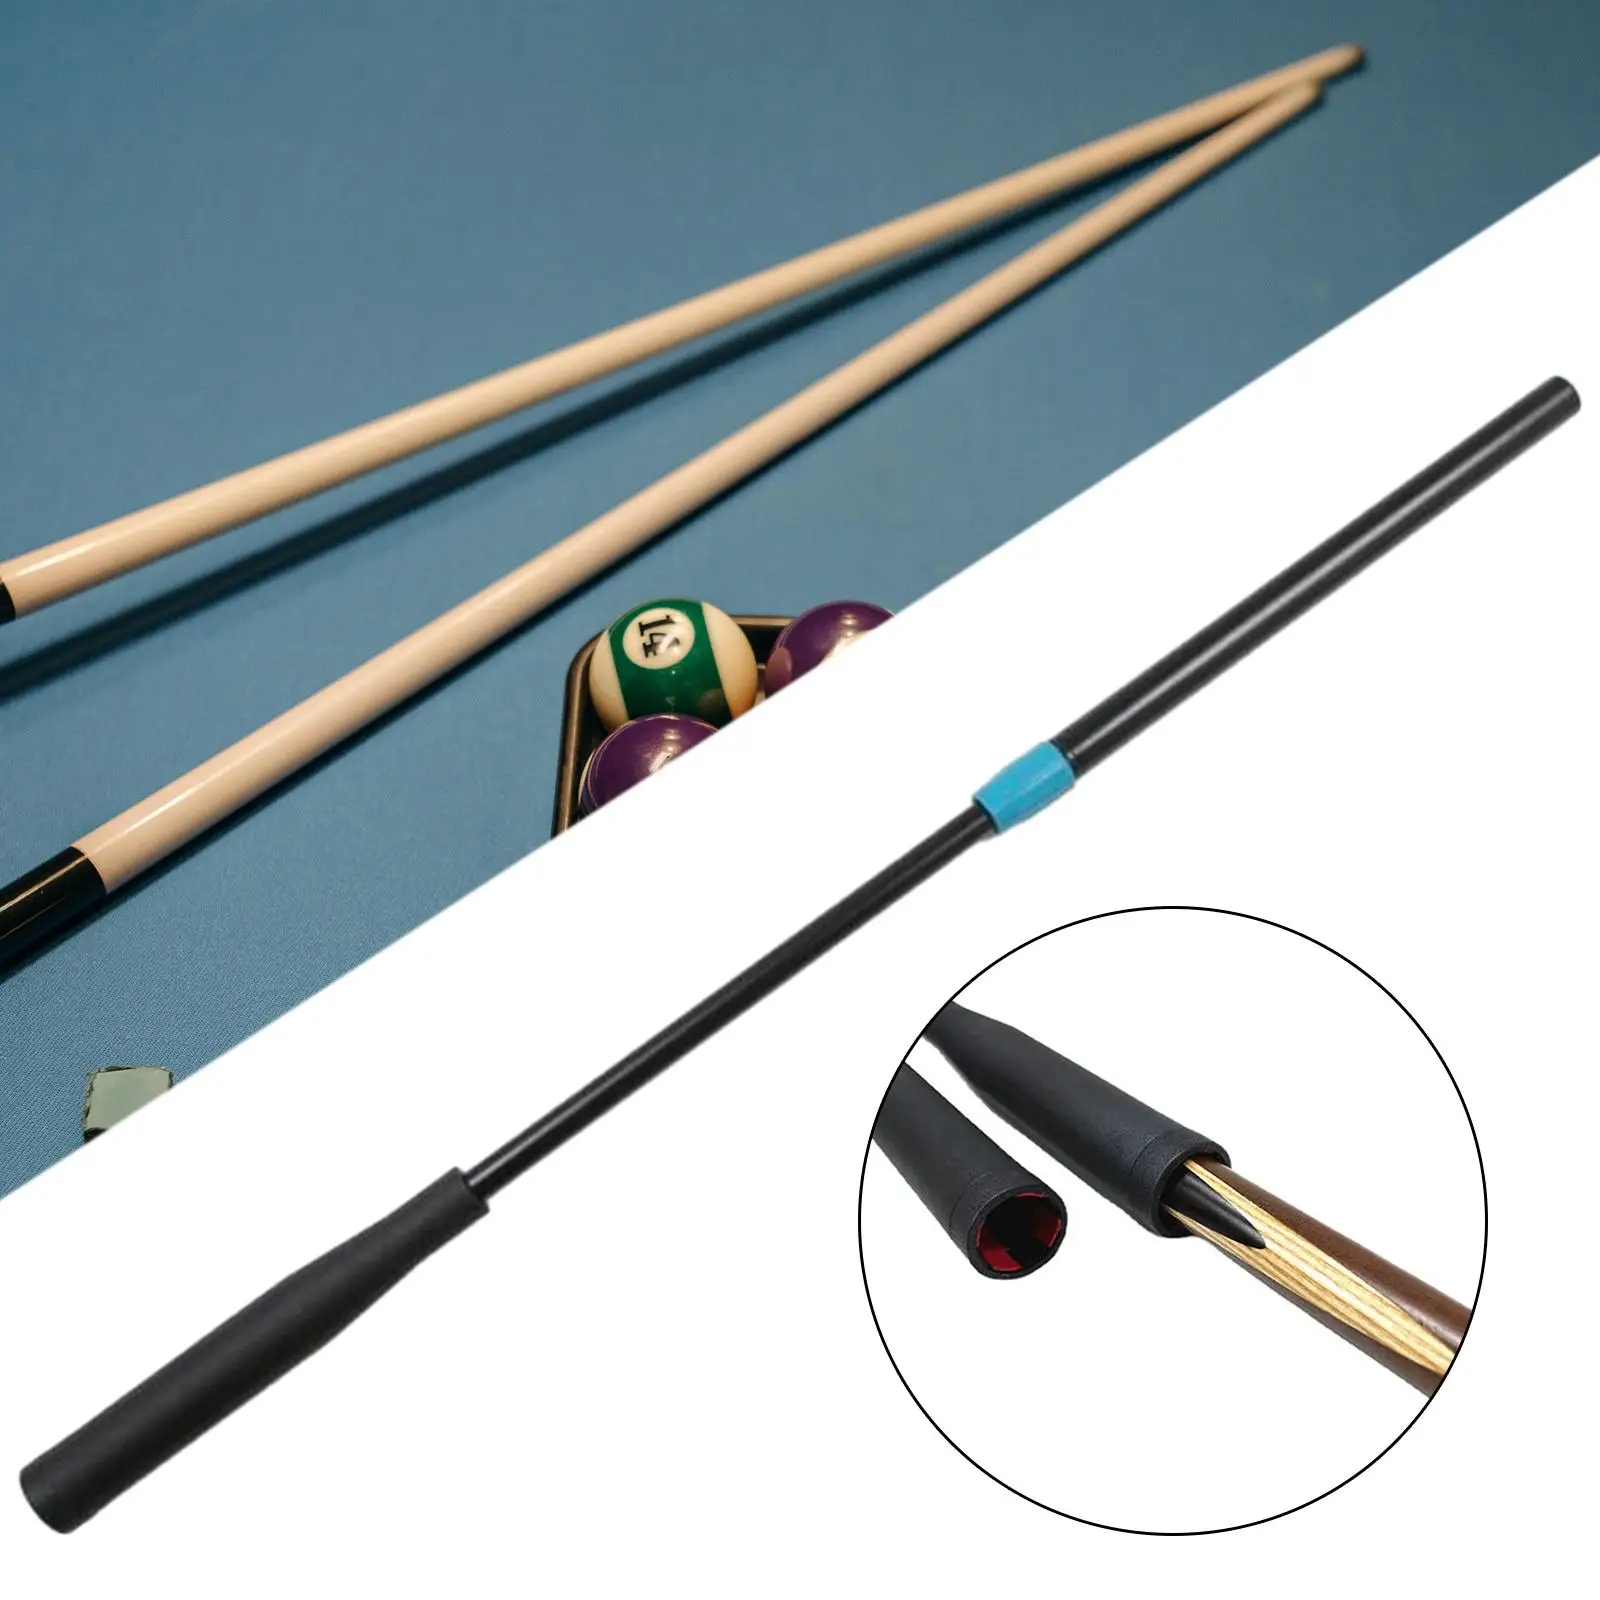 Pool Cue Extension, Billiard Pool Extension, Billiards Cue Shaft Sleeve Extension Tool, Lightweight Professional Accessories